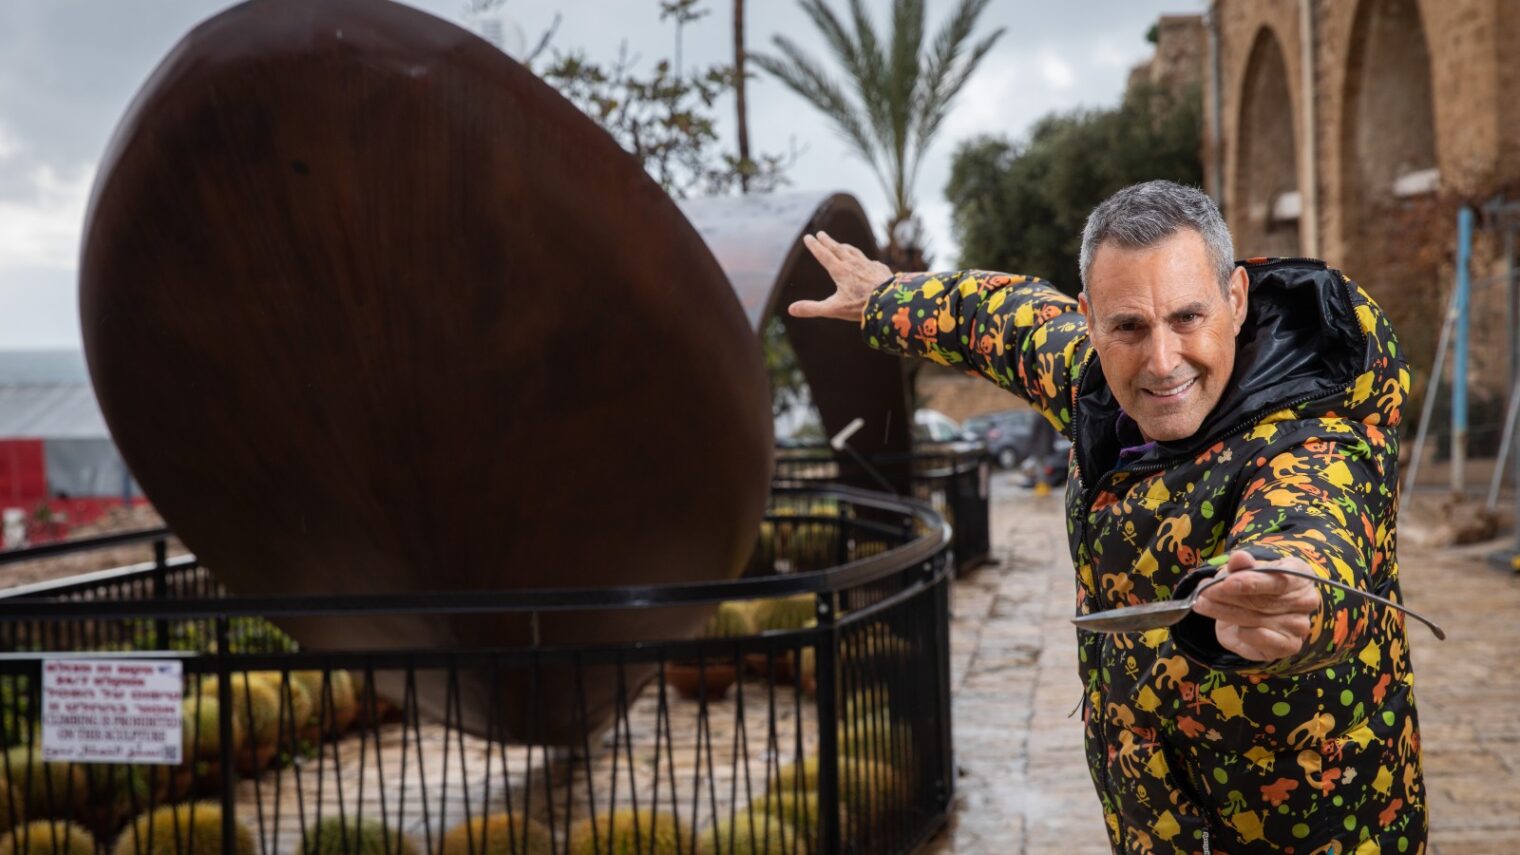 Mystifier Uri Geller next to a giant bent spoon outside his museum in Jaffa. Photo by Hadas Parush/Flash90